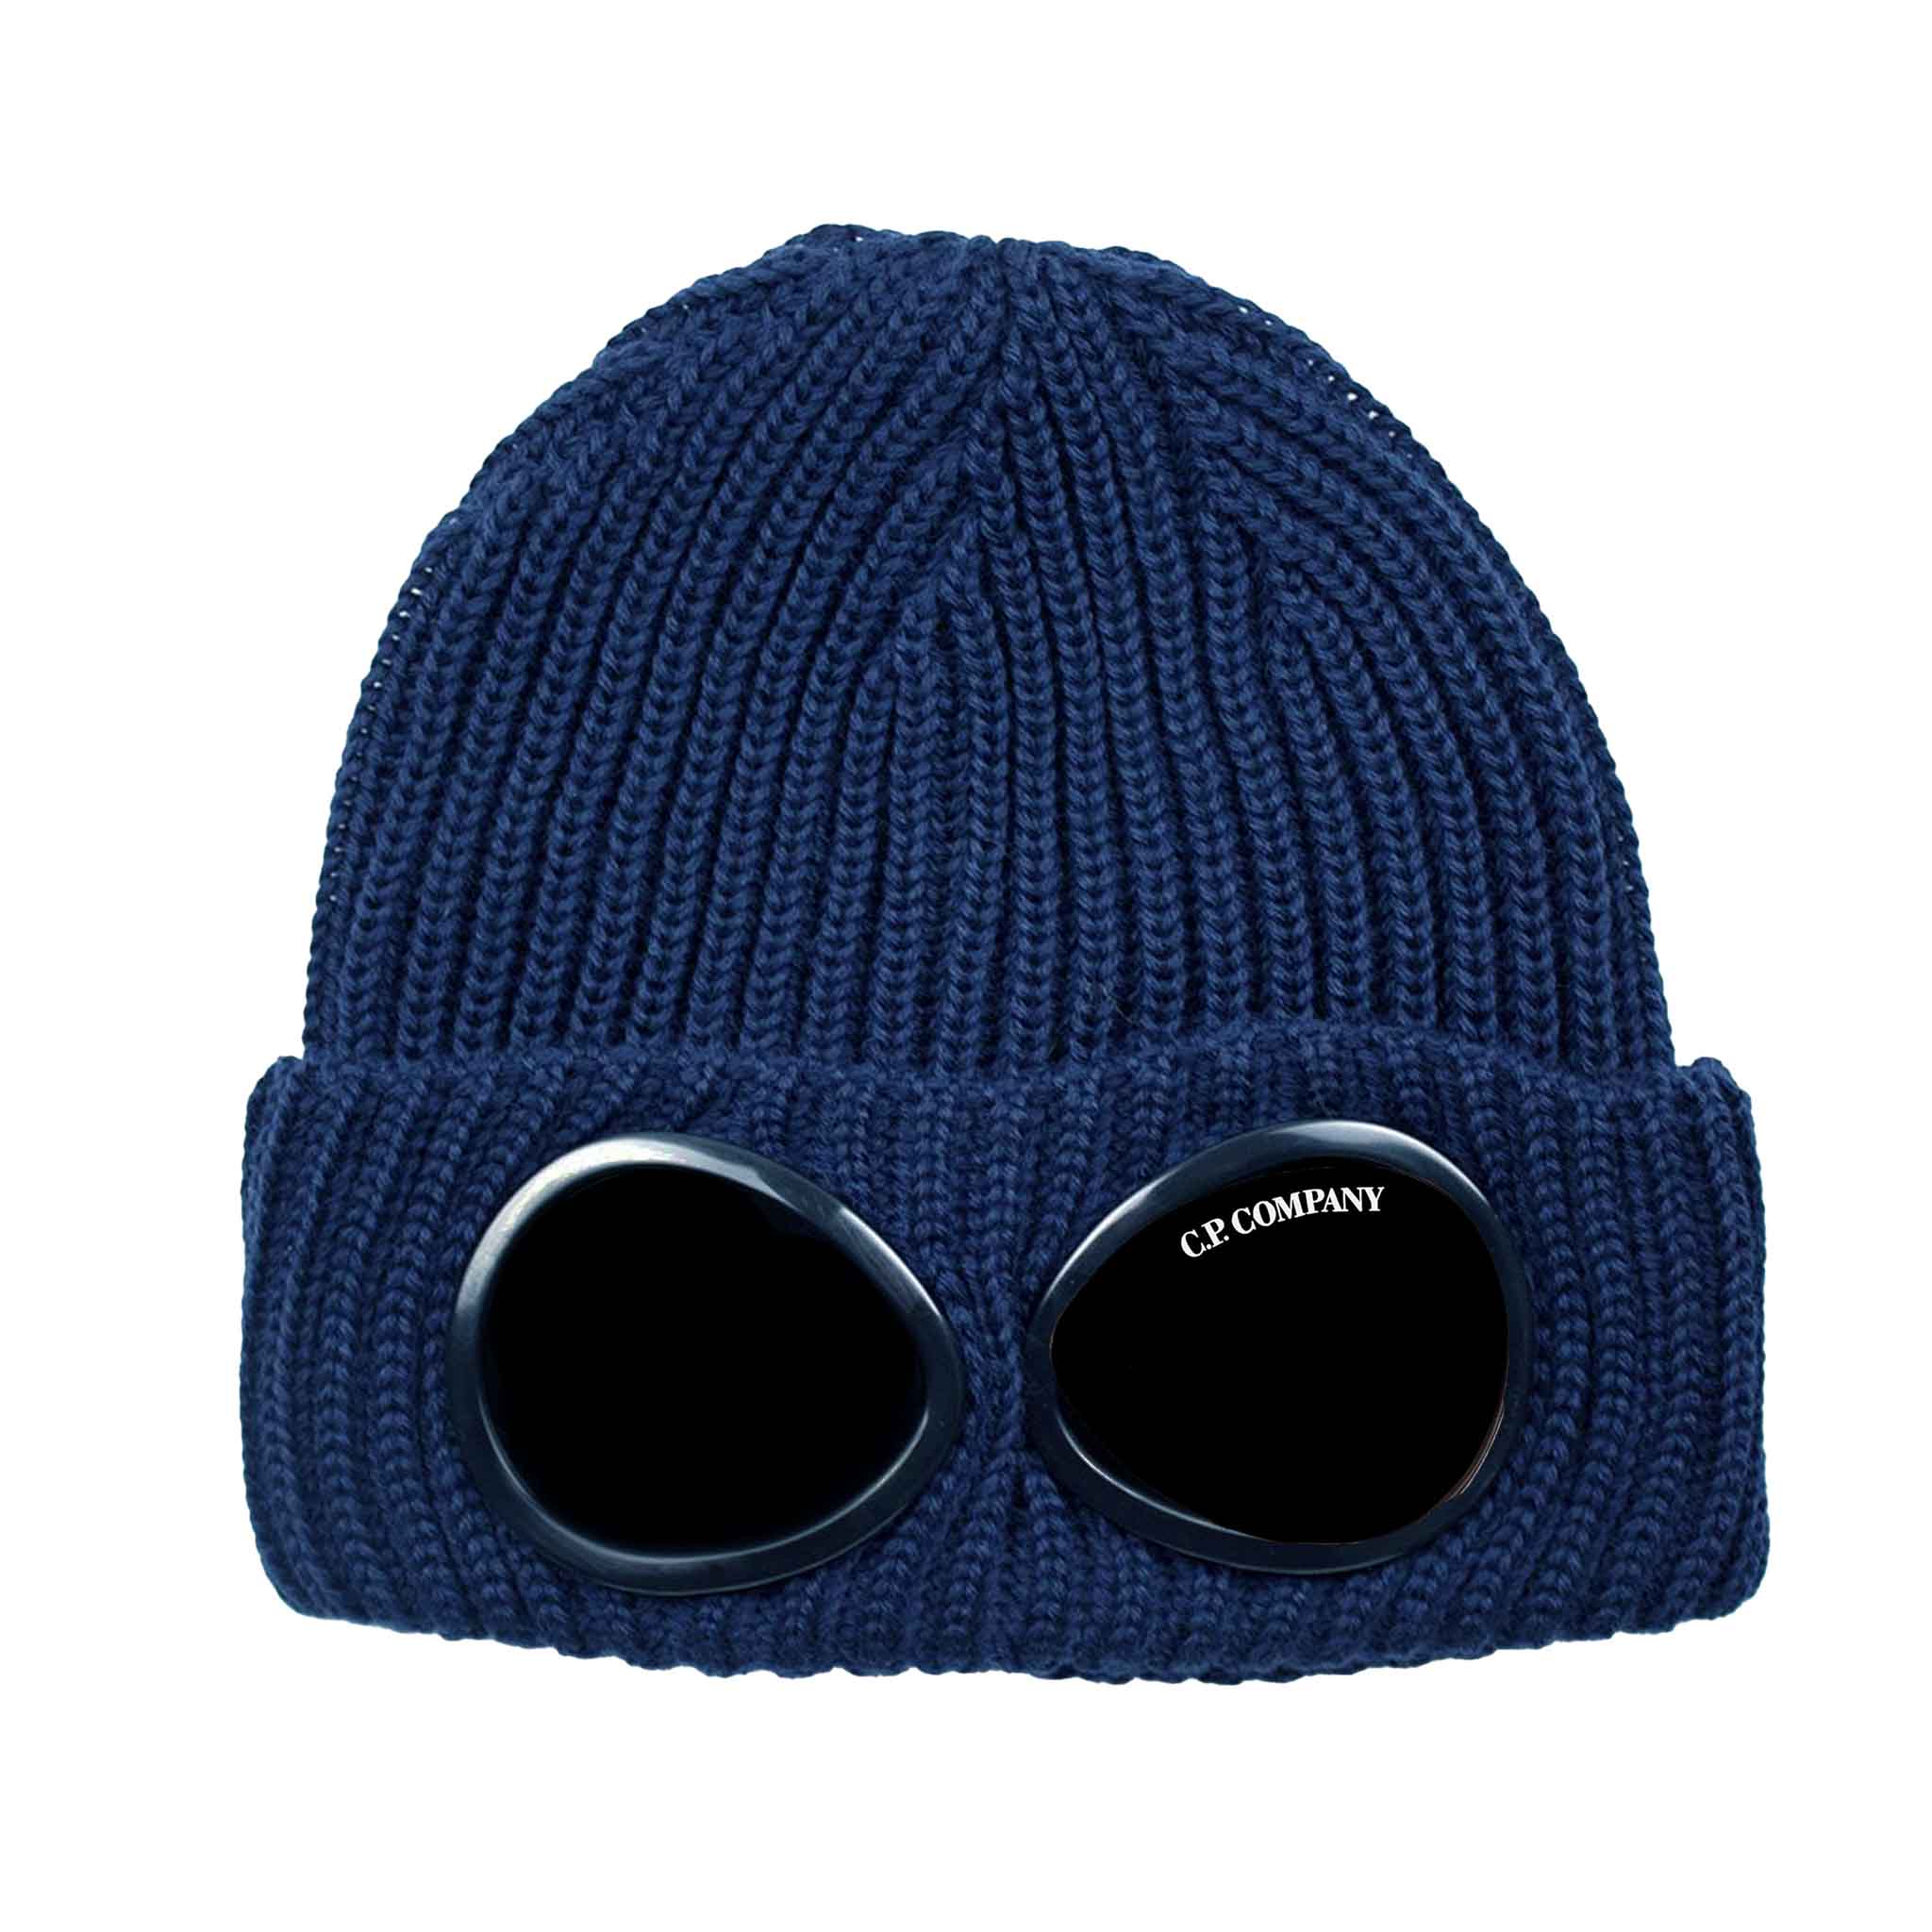 C.P. Company Cotton Goggle Beanie in Ink Blue